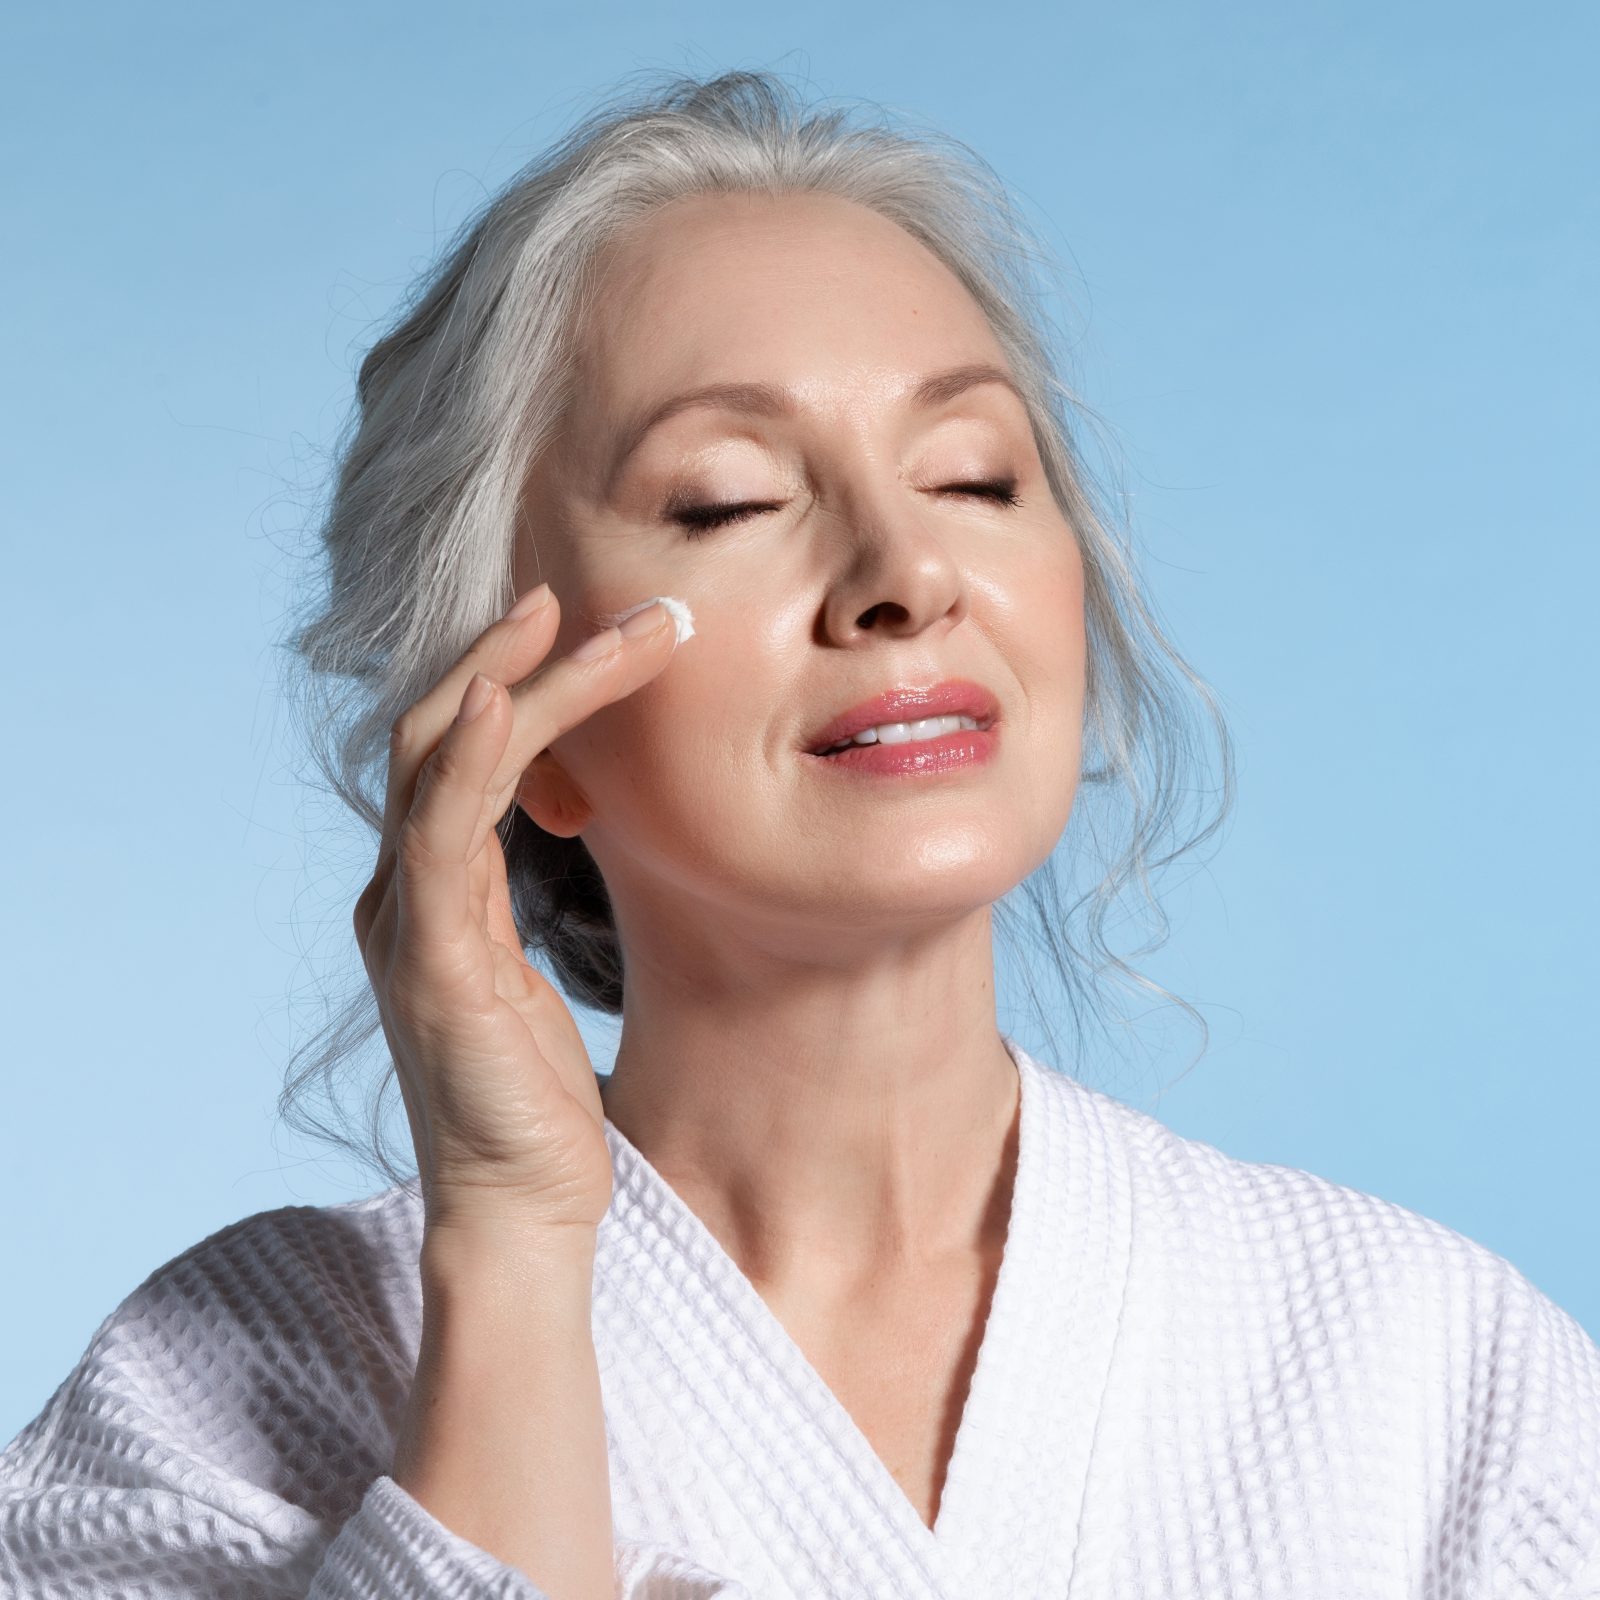 Senior woman with eyes closed putting cosmetic moisturizing rejuvenating cream on face feeling pleasure. Studio portrait on blue. Refreshment and anti-wrinkle skin therapy